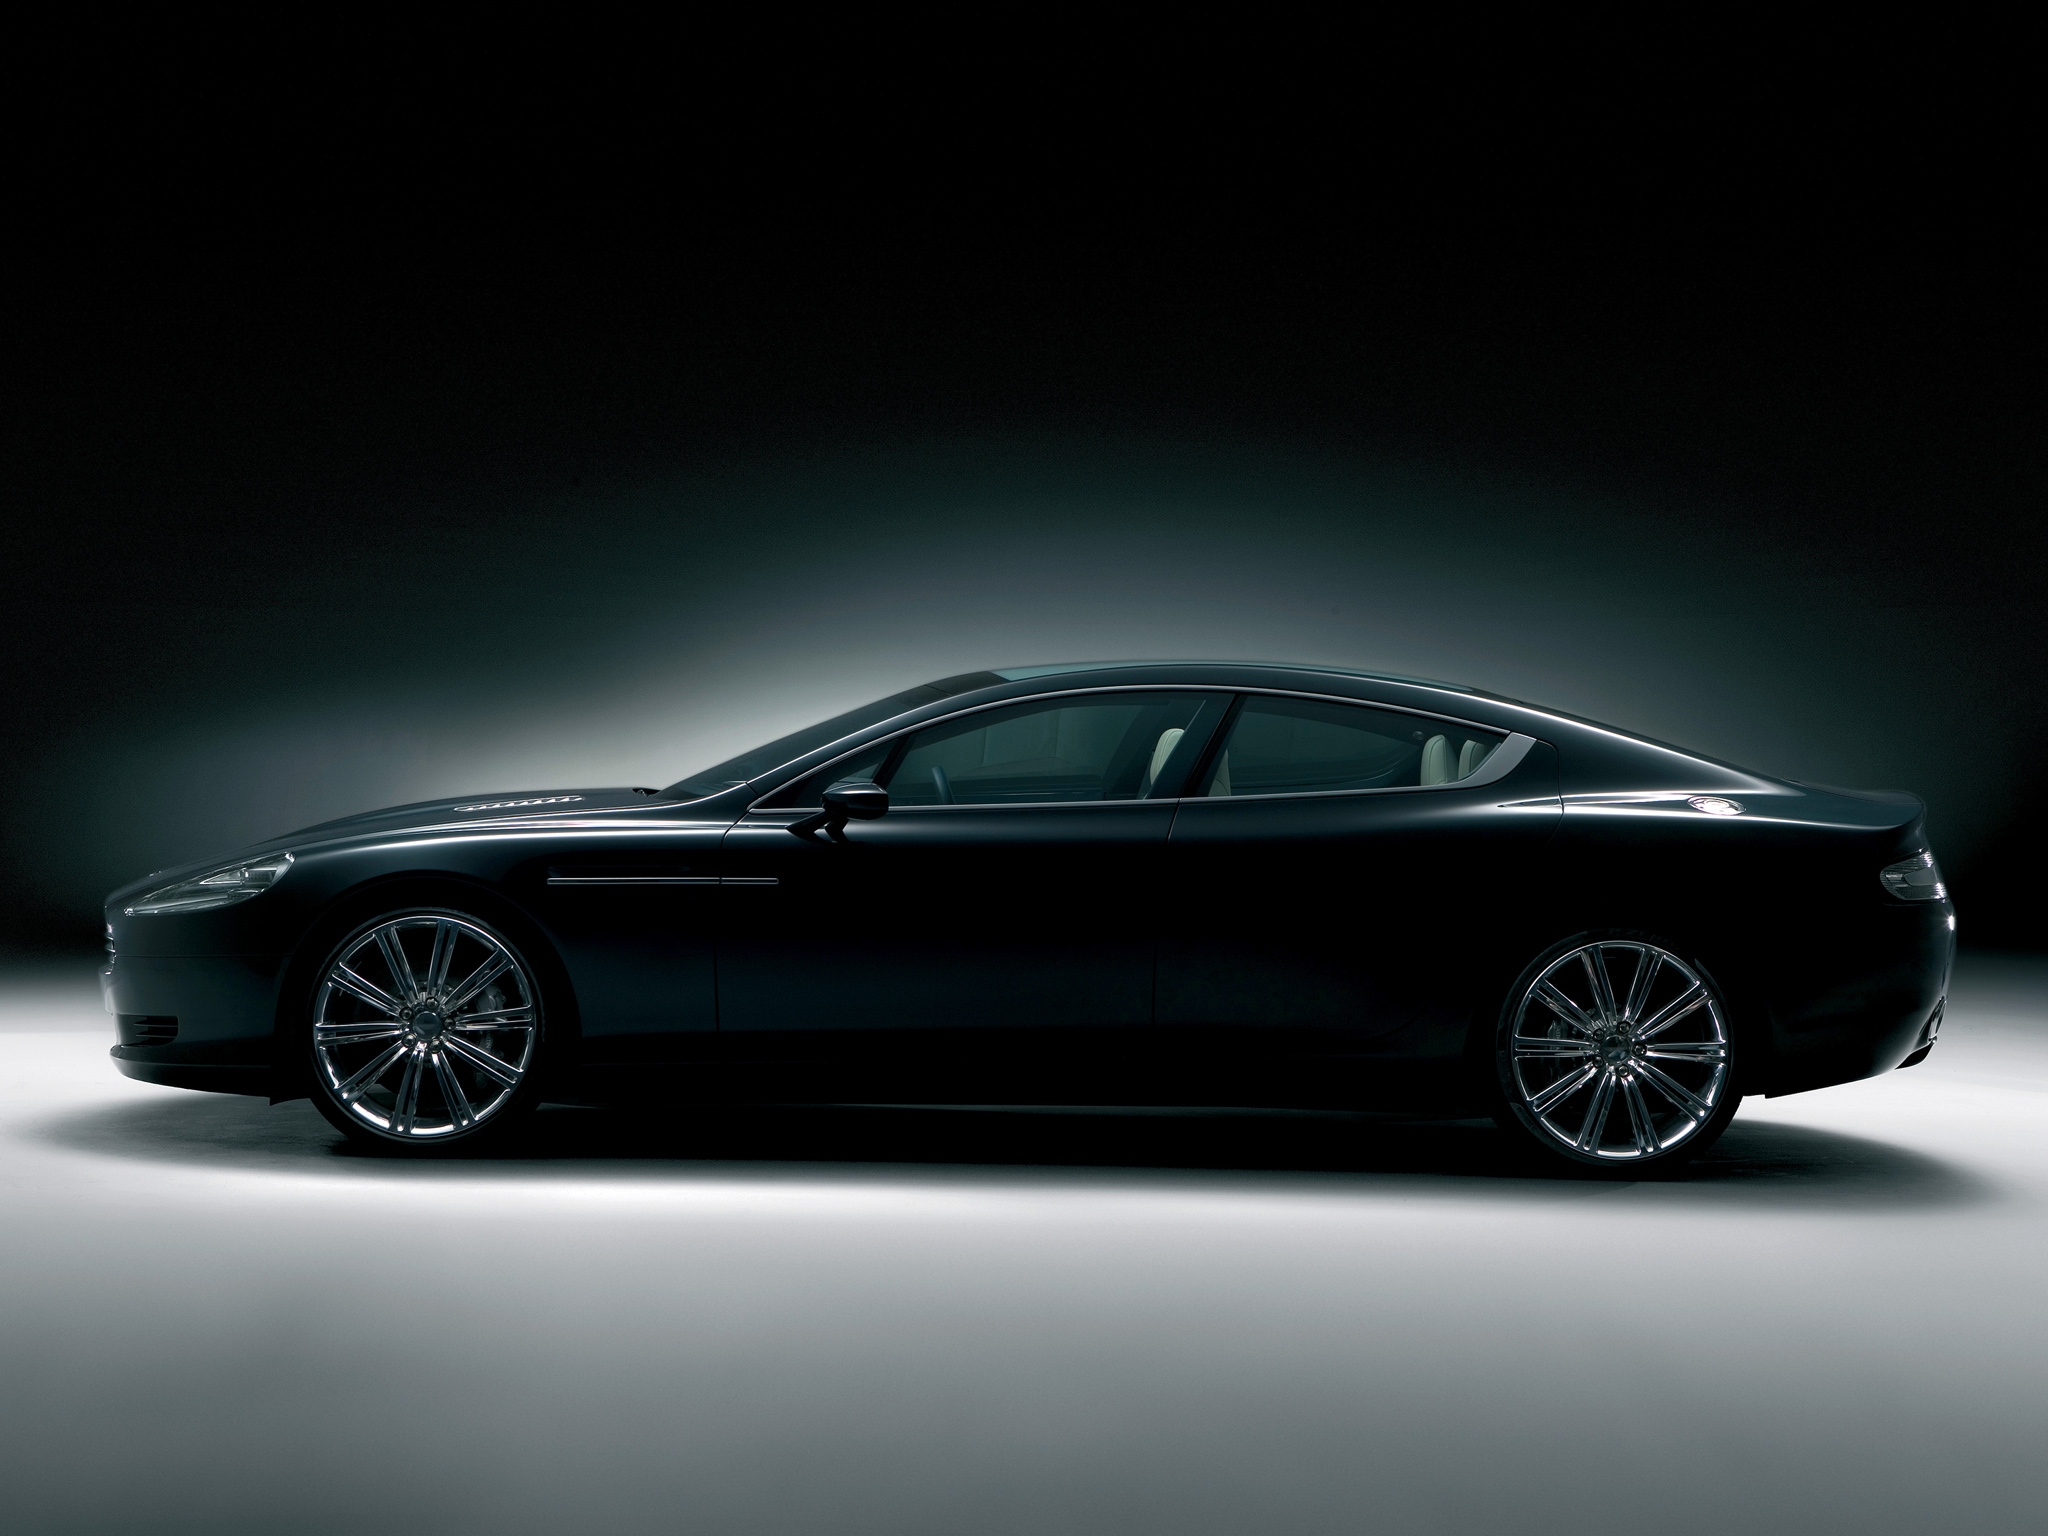 102959 download wallpaper aston martin, cars, black, side view, style, concept car, 2006, rapide screensavers and pictures for free